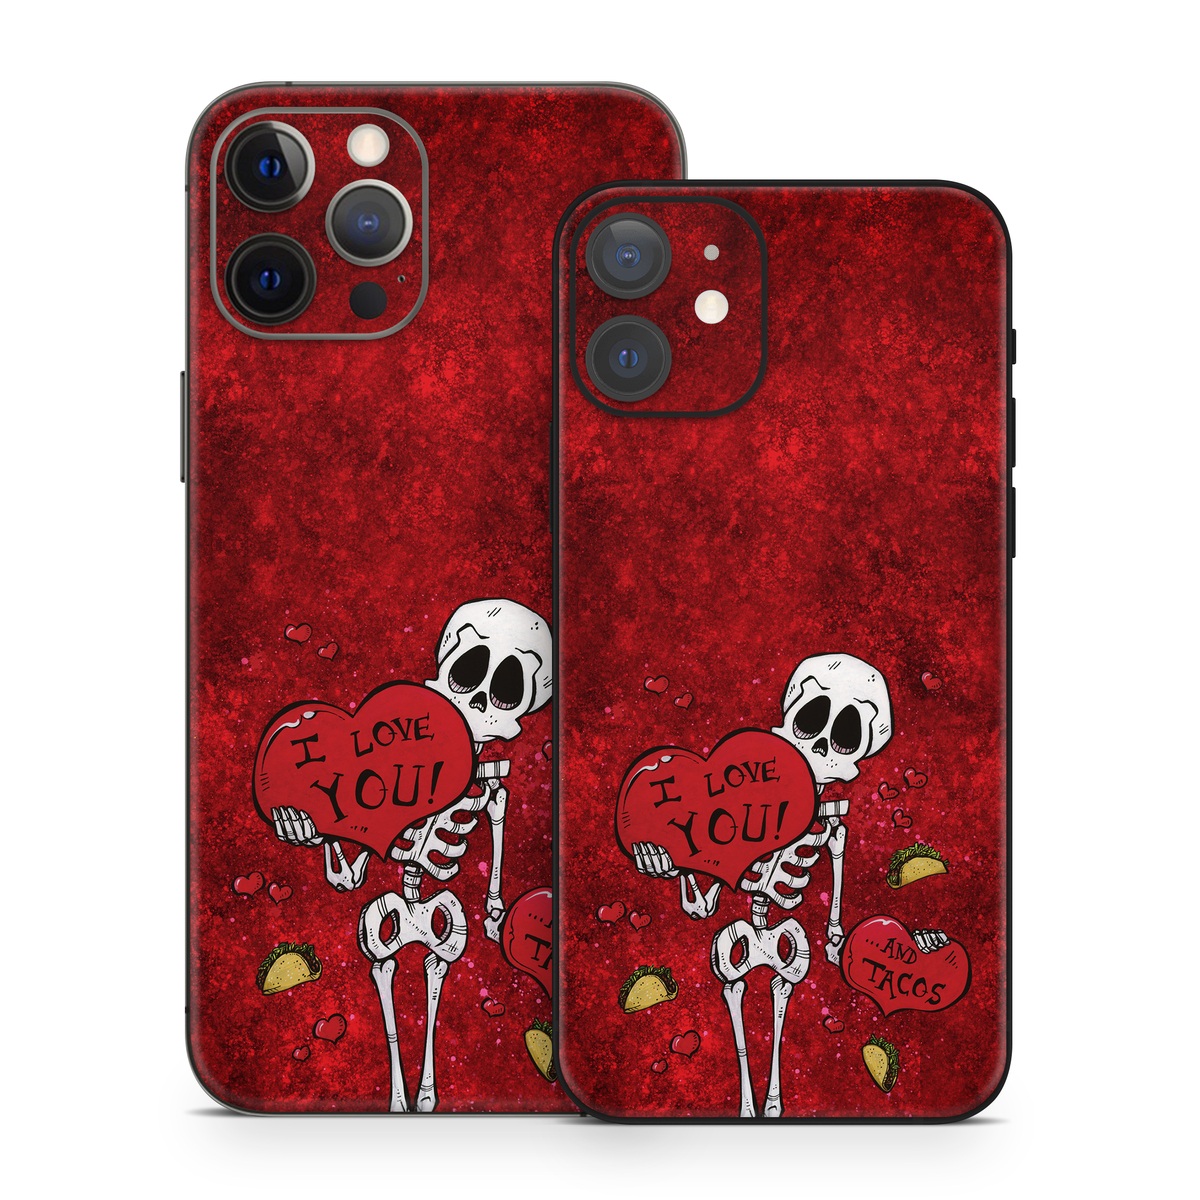 iPhone 12 Series Skin design of Font, Red, Art, Magenta, Tints and shades, Pattern, Bone, Plant, Carmine, Visual arts, with black, white, gray, red, yellow colors